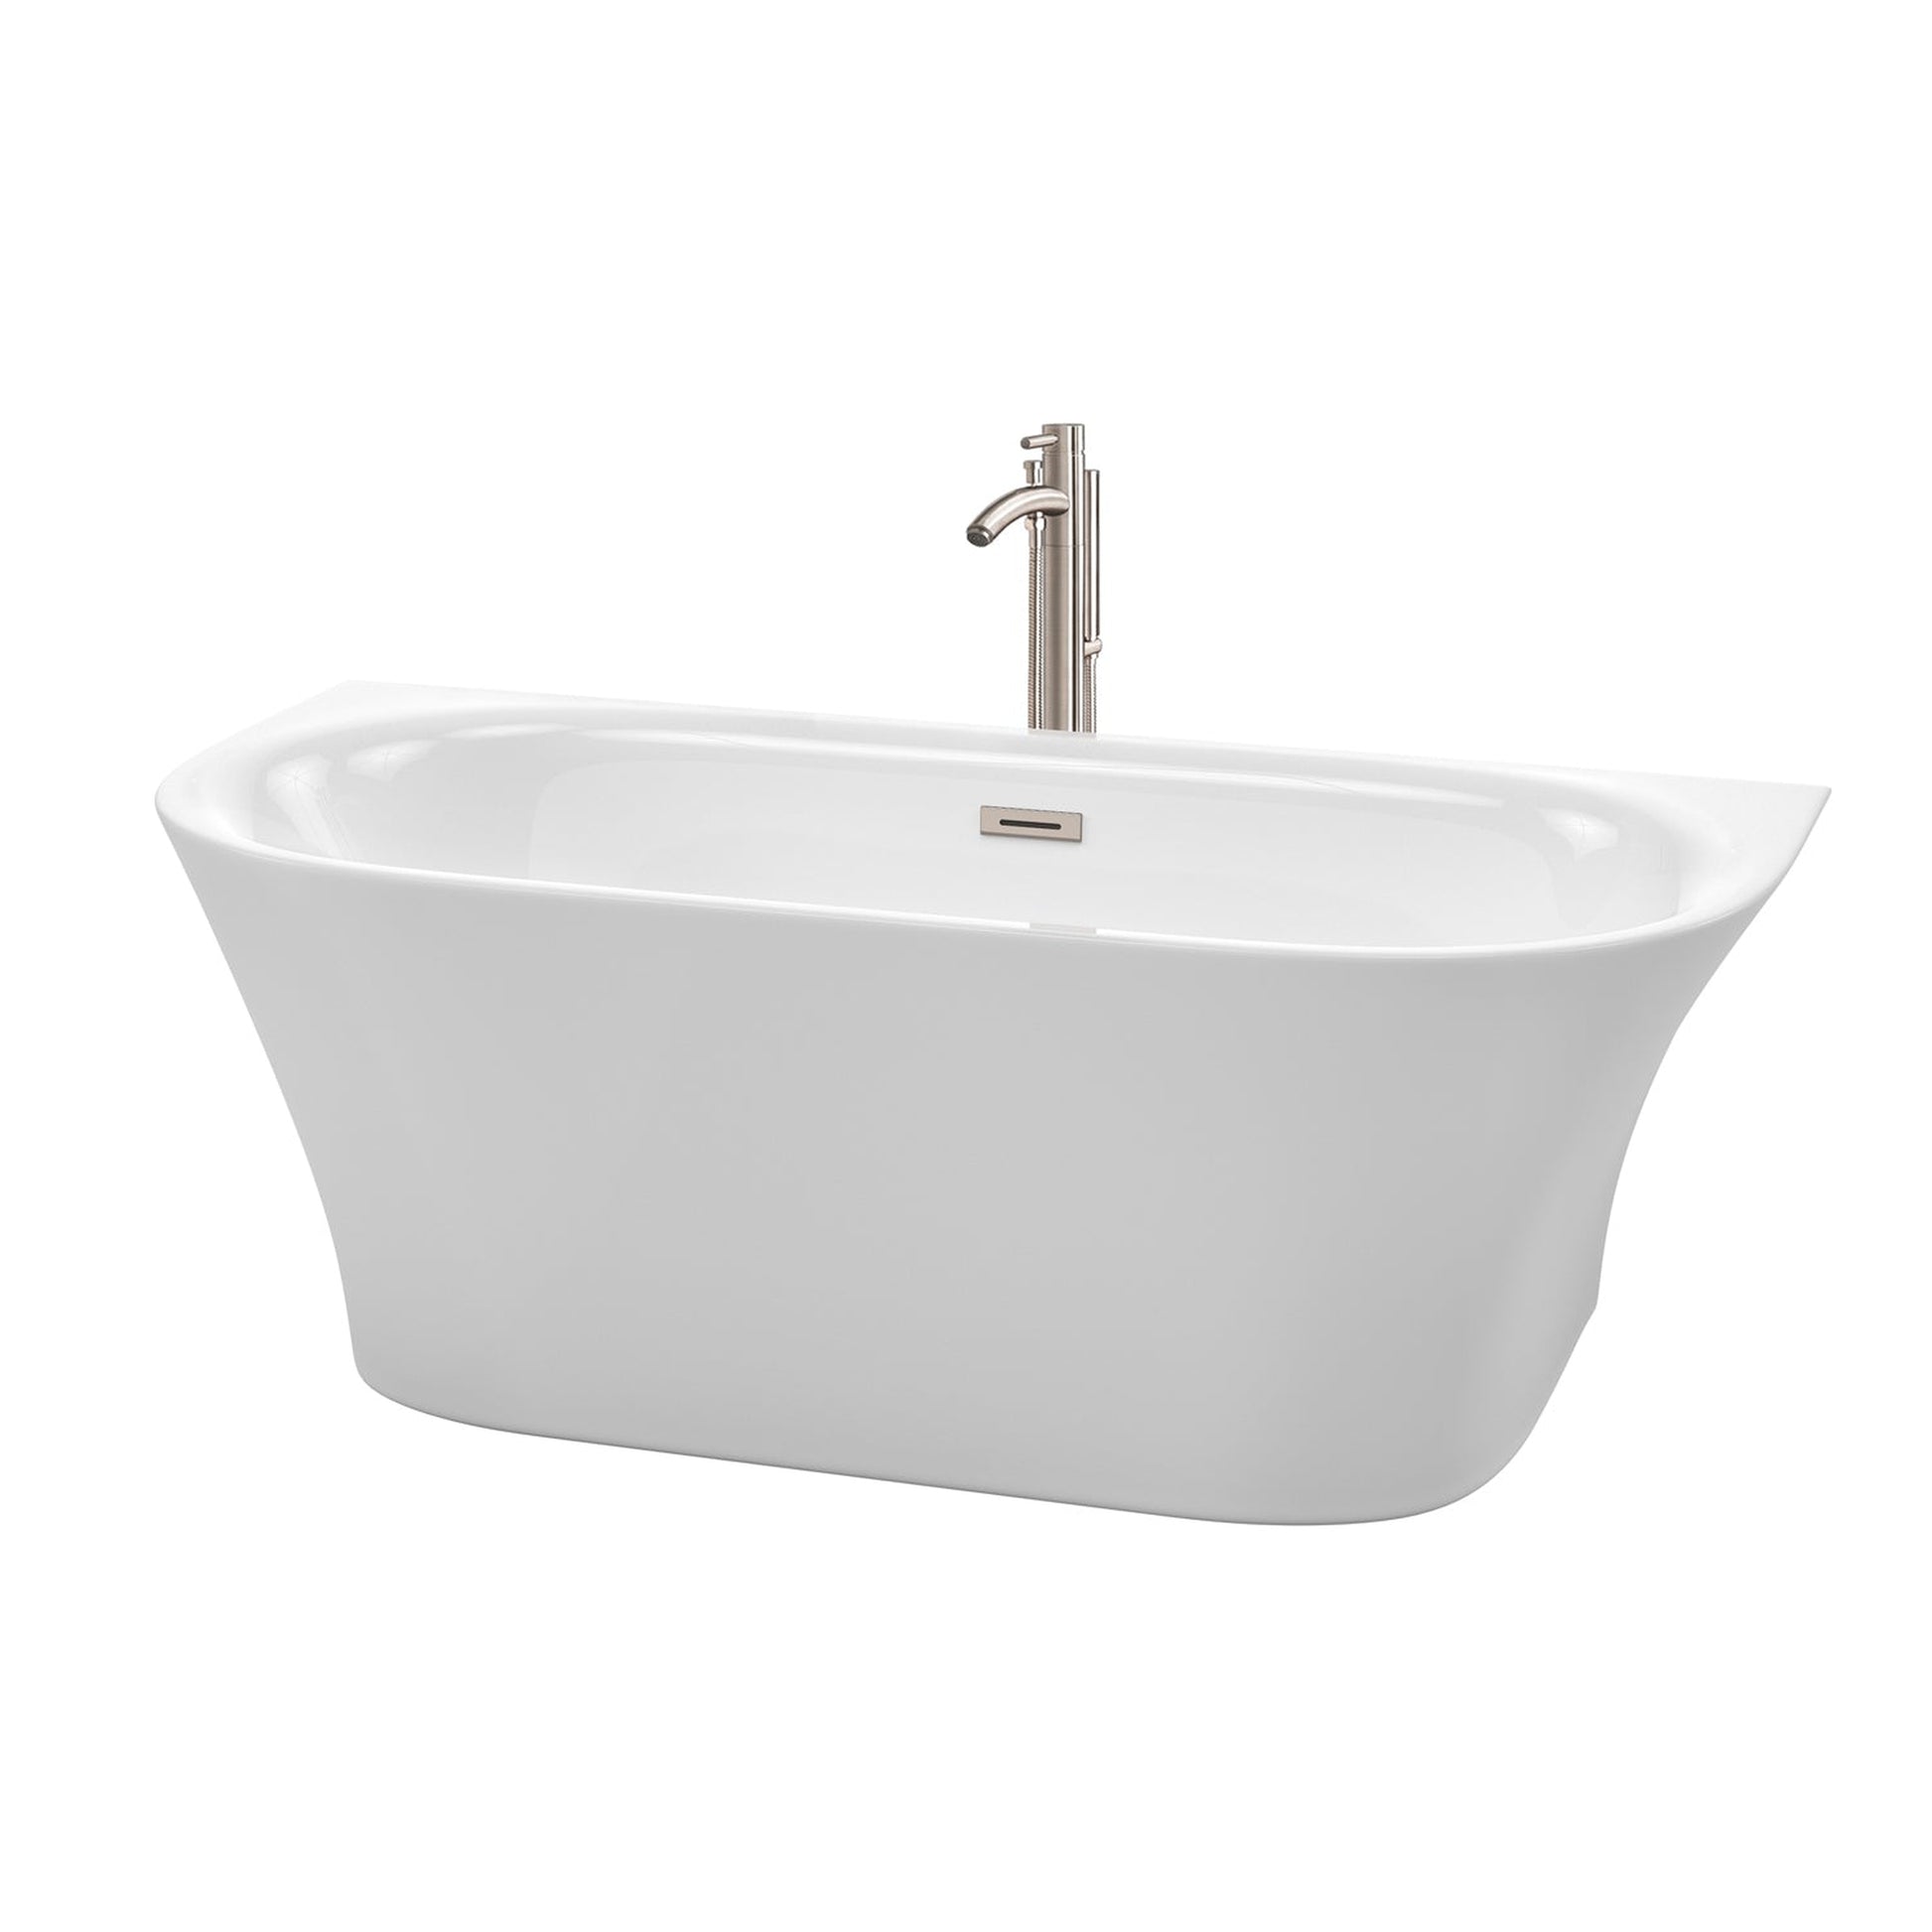 Wyndham Collection Cybill 67" Freestanding Bathtub in White With Floor Mounted Faucet, Drain and Overflow Trim in Brushed Nickel